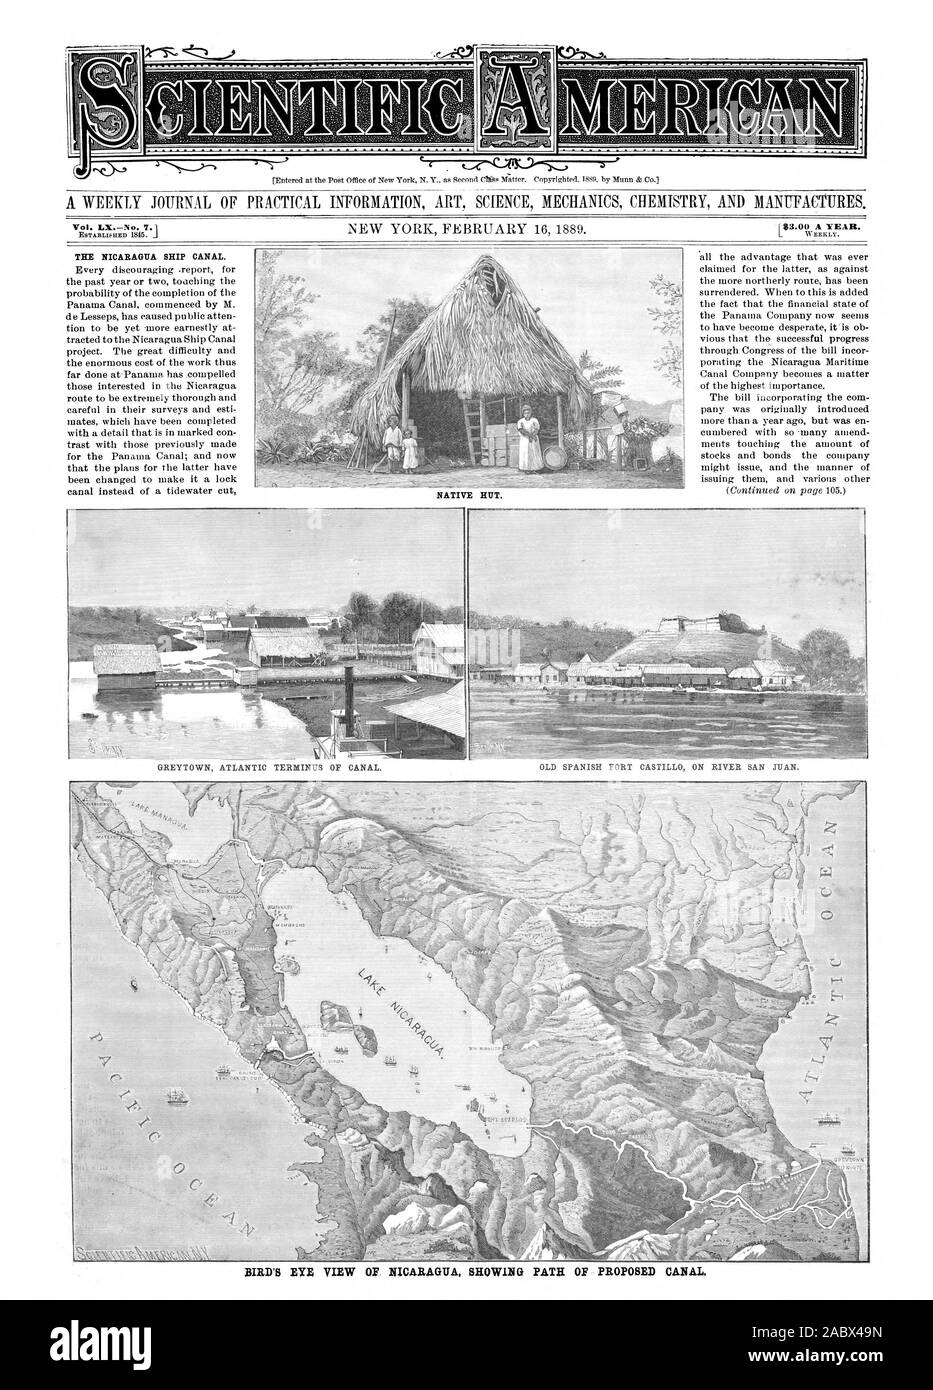 GREYTOWN ATLANTIC TERMINUS OF CANAL. OLD SPANISH FORT CASTILL ON RIVER SAN JUAN. BIRD'S EYE VIEW OF NICARAGUA SHOWING PIITH OF PROPOSED CANAL THE NICARAGUA SHIP CANAL., scientific american, 1889-02-16 Stock Photo